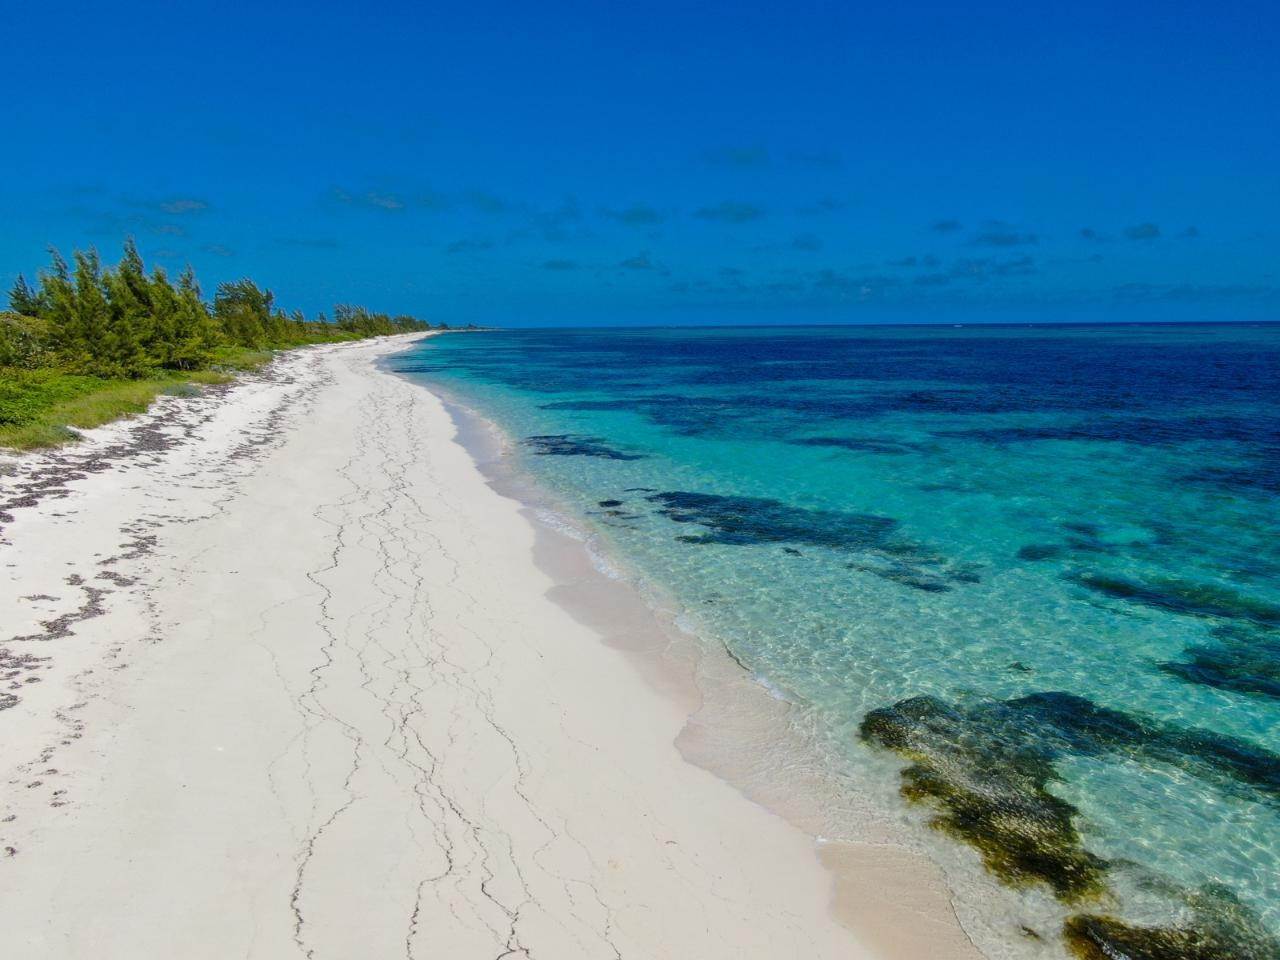 20. Lots / Acreage for Sale at Old Bight, Cat Island, Bahamas